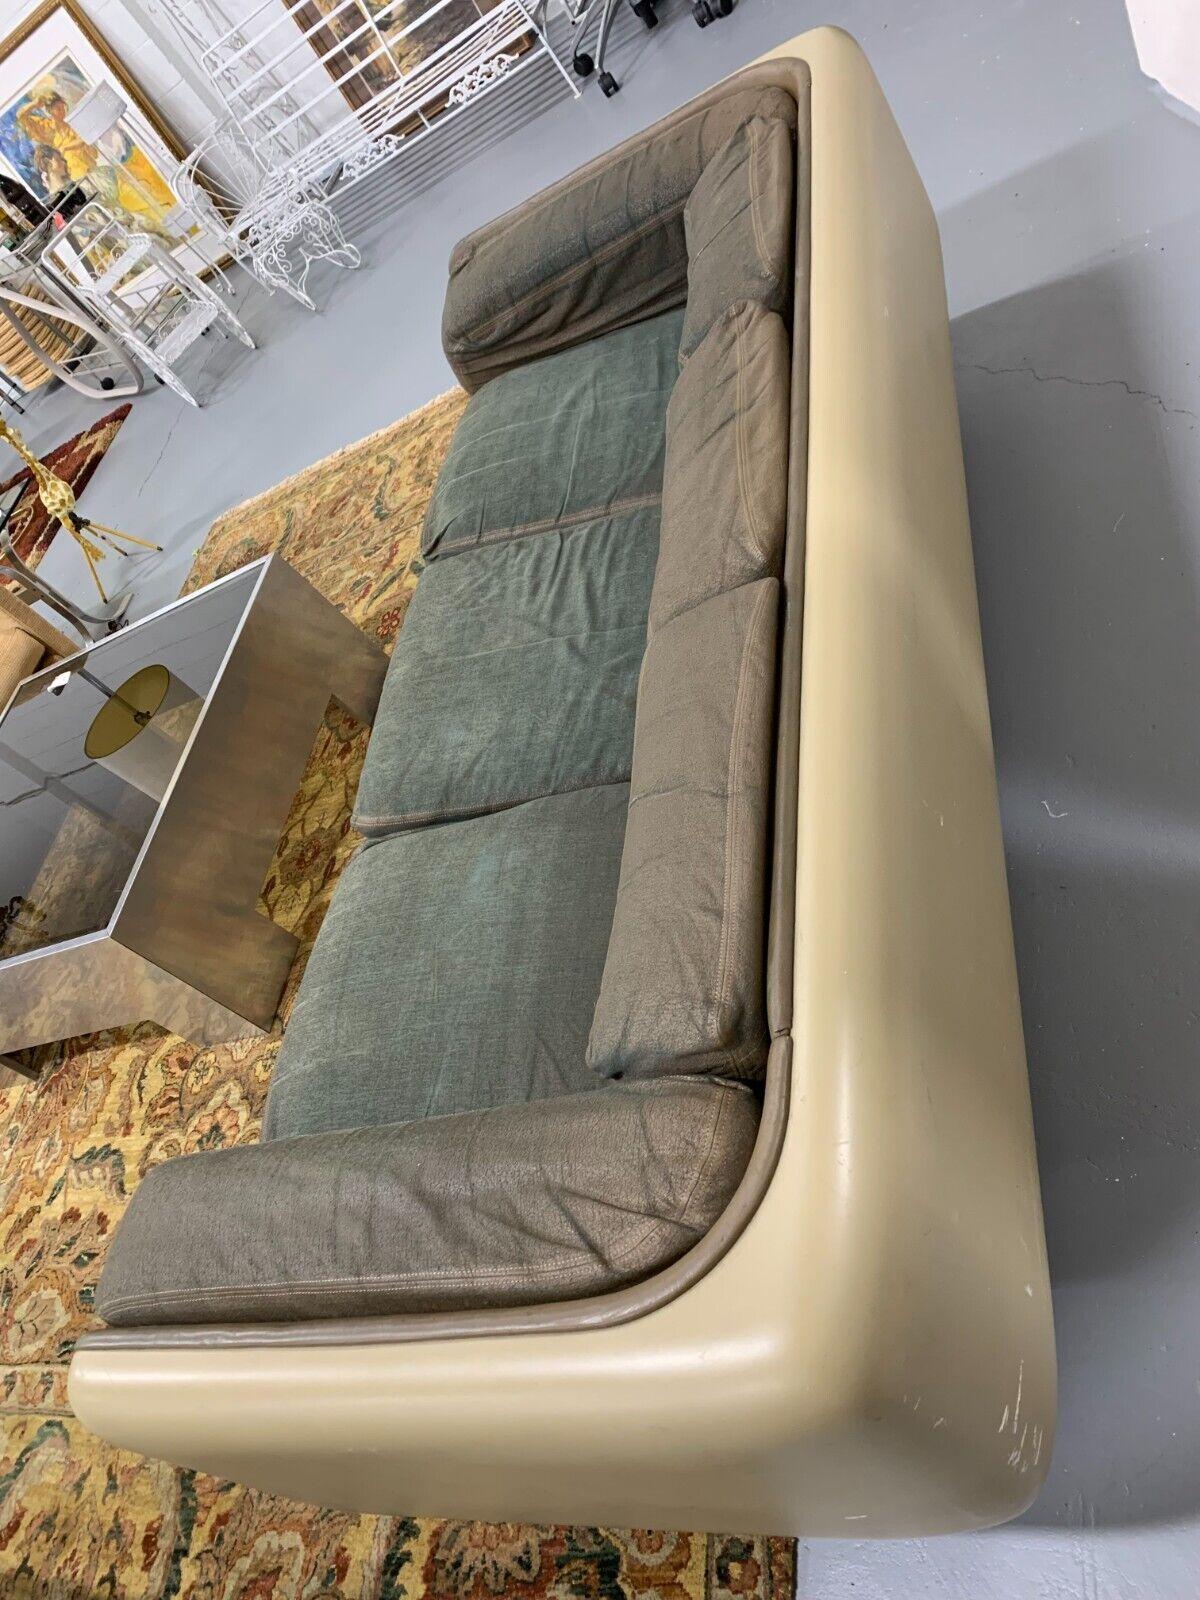 Late 20th Century Mid-Century Modern Fiberglass Sofa by William Andrus for Steelcase, 1970s